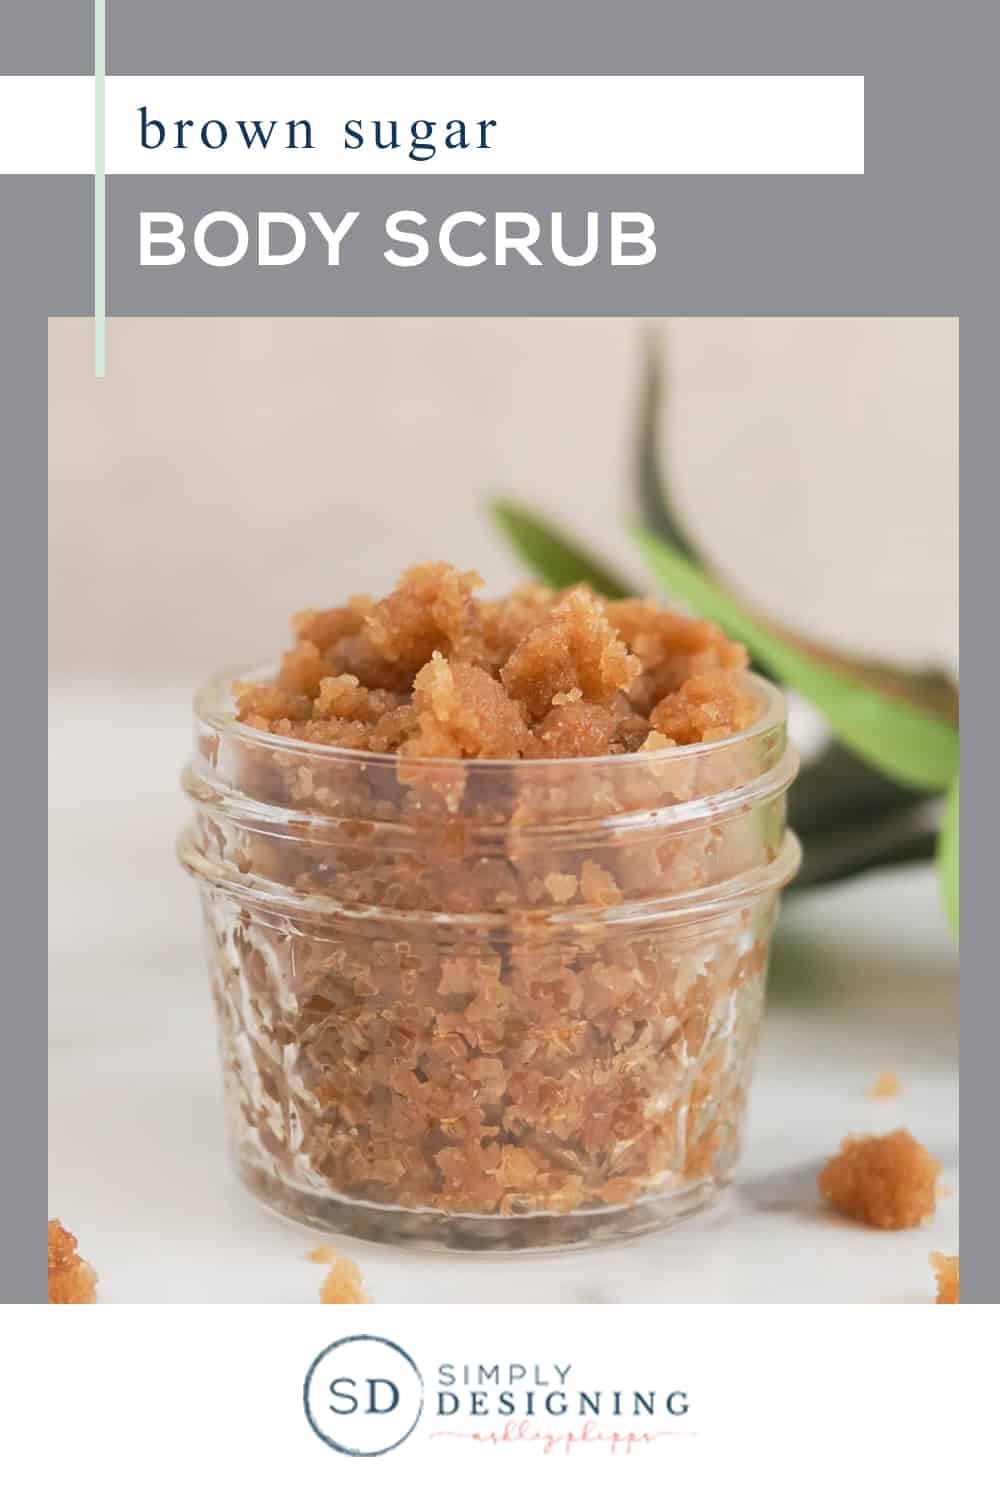 This Brown Sugar Scrub is a fantastic way to exfoliate your whole body at home with an inexpensive scrub that you can easily make yourself